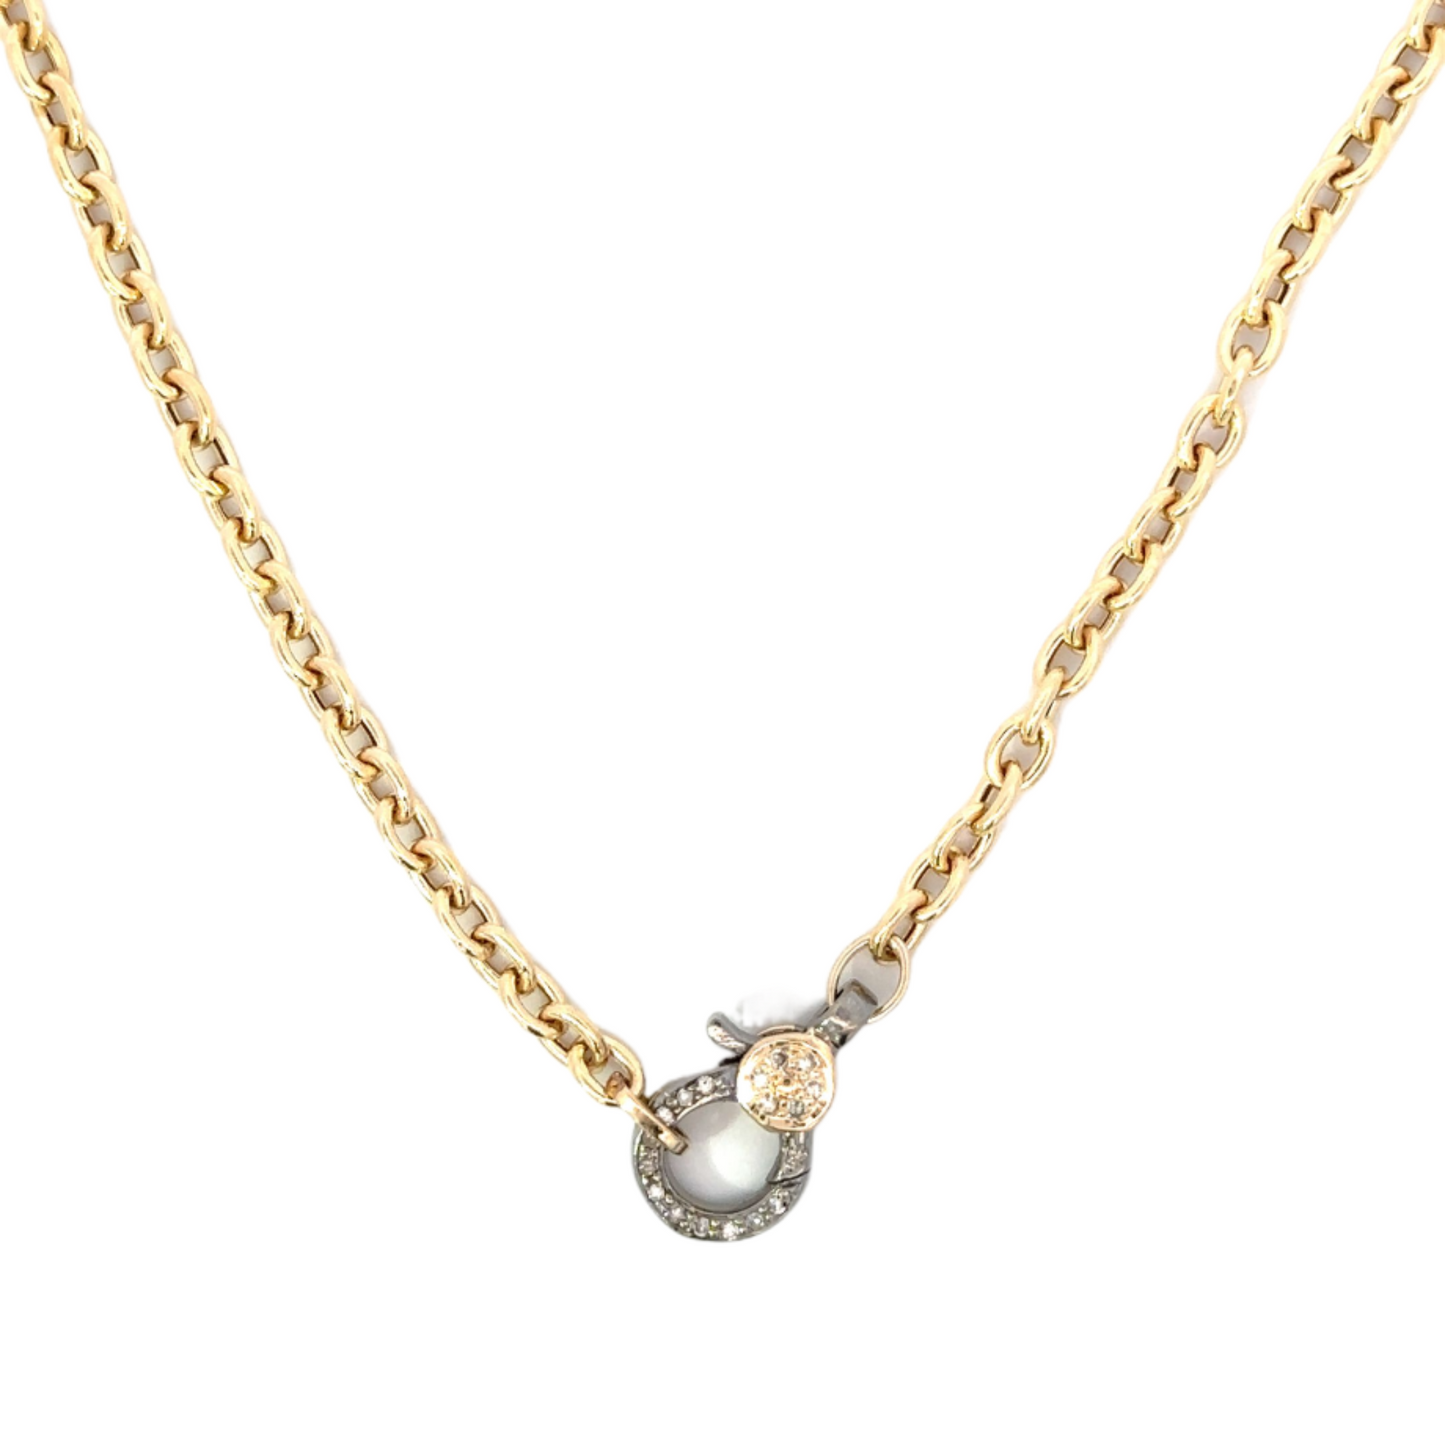 Yellow Gold Oval Chain Necklace with Small Mixed Metal Pave Lobster